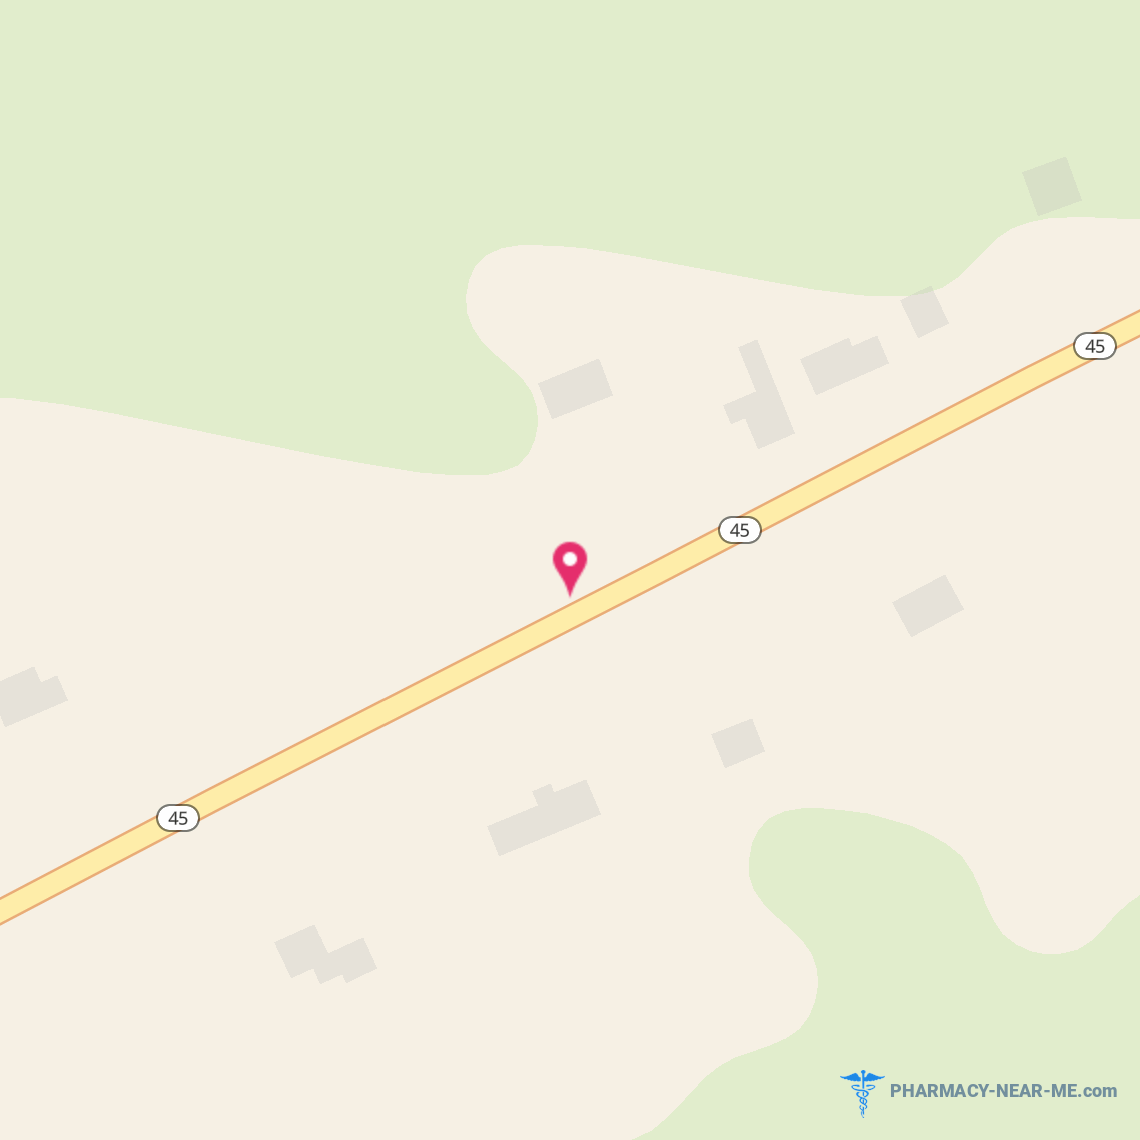 CUMBERLAND PHARMACY, INC - Pharmacy Hours, Phone, Reviews & Information: 1756 Anderson Highway, Cumberland, Virginia 23040, United States